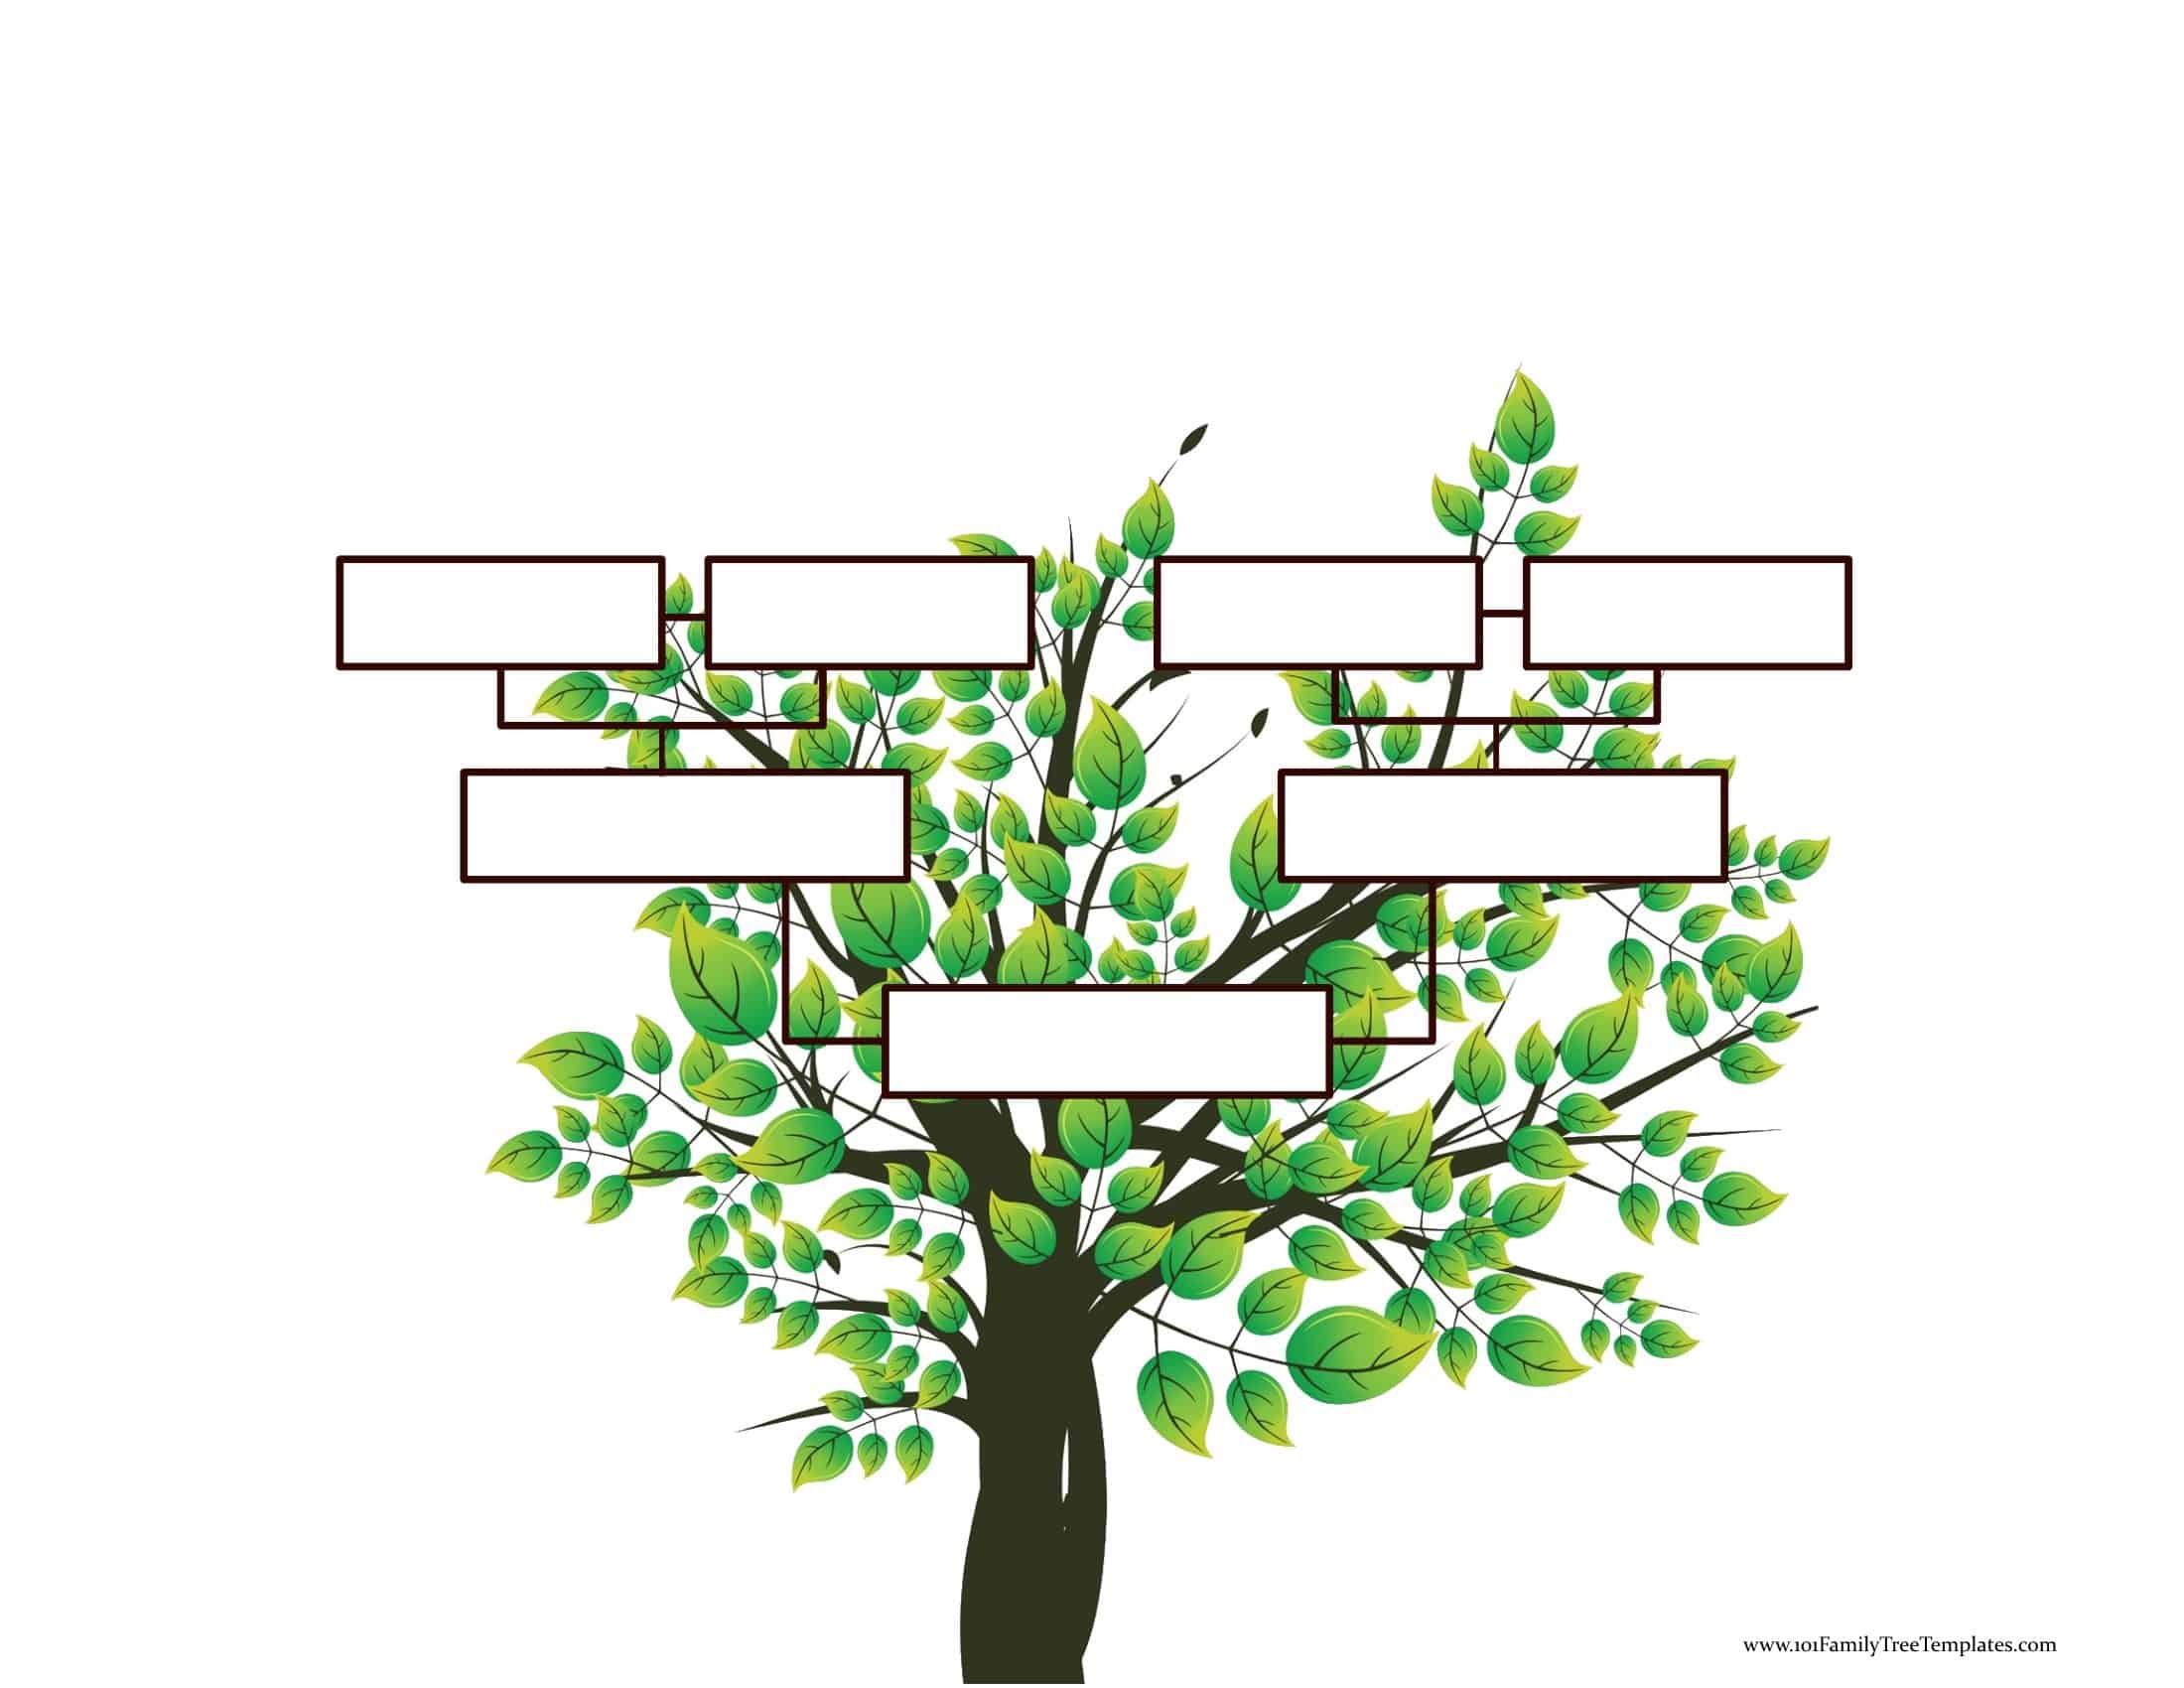 family-27-customizable-family-tree-template-editable-images